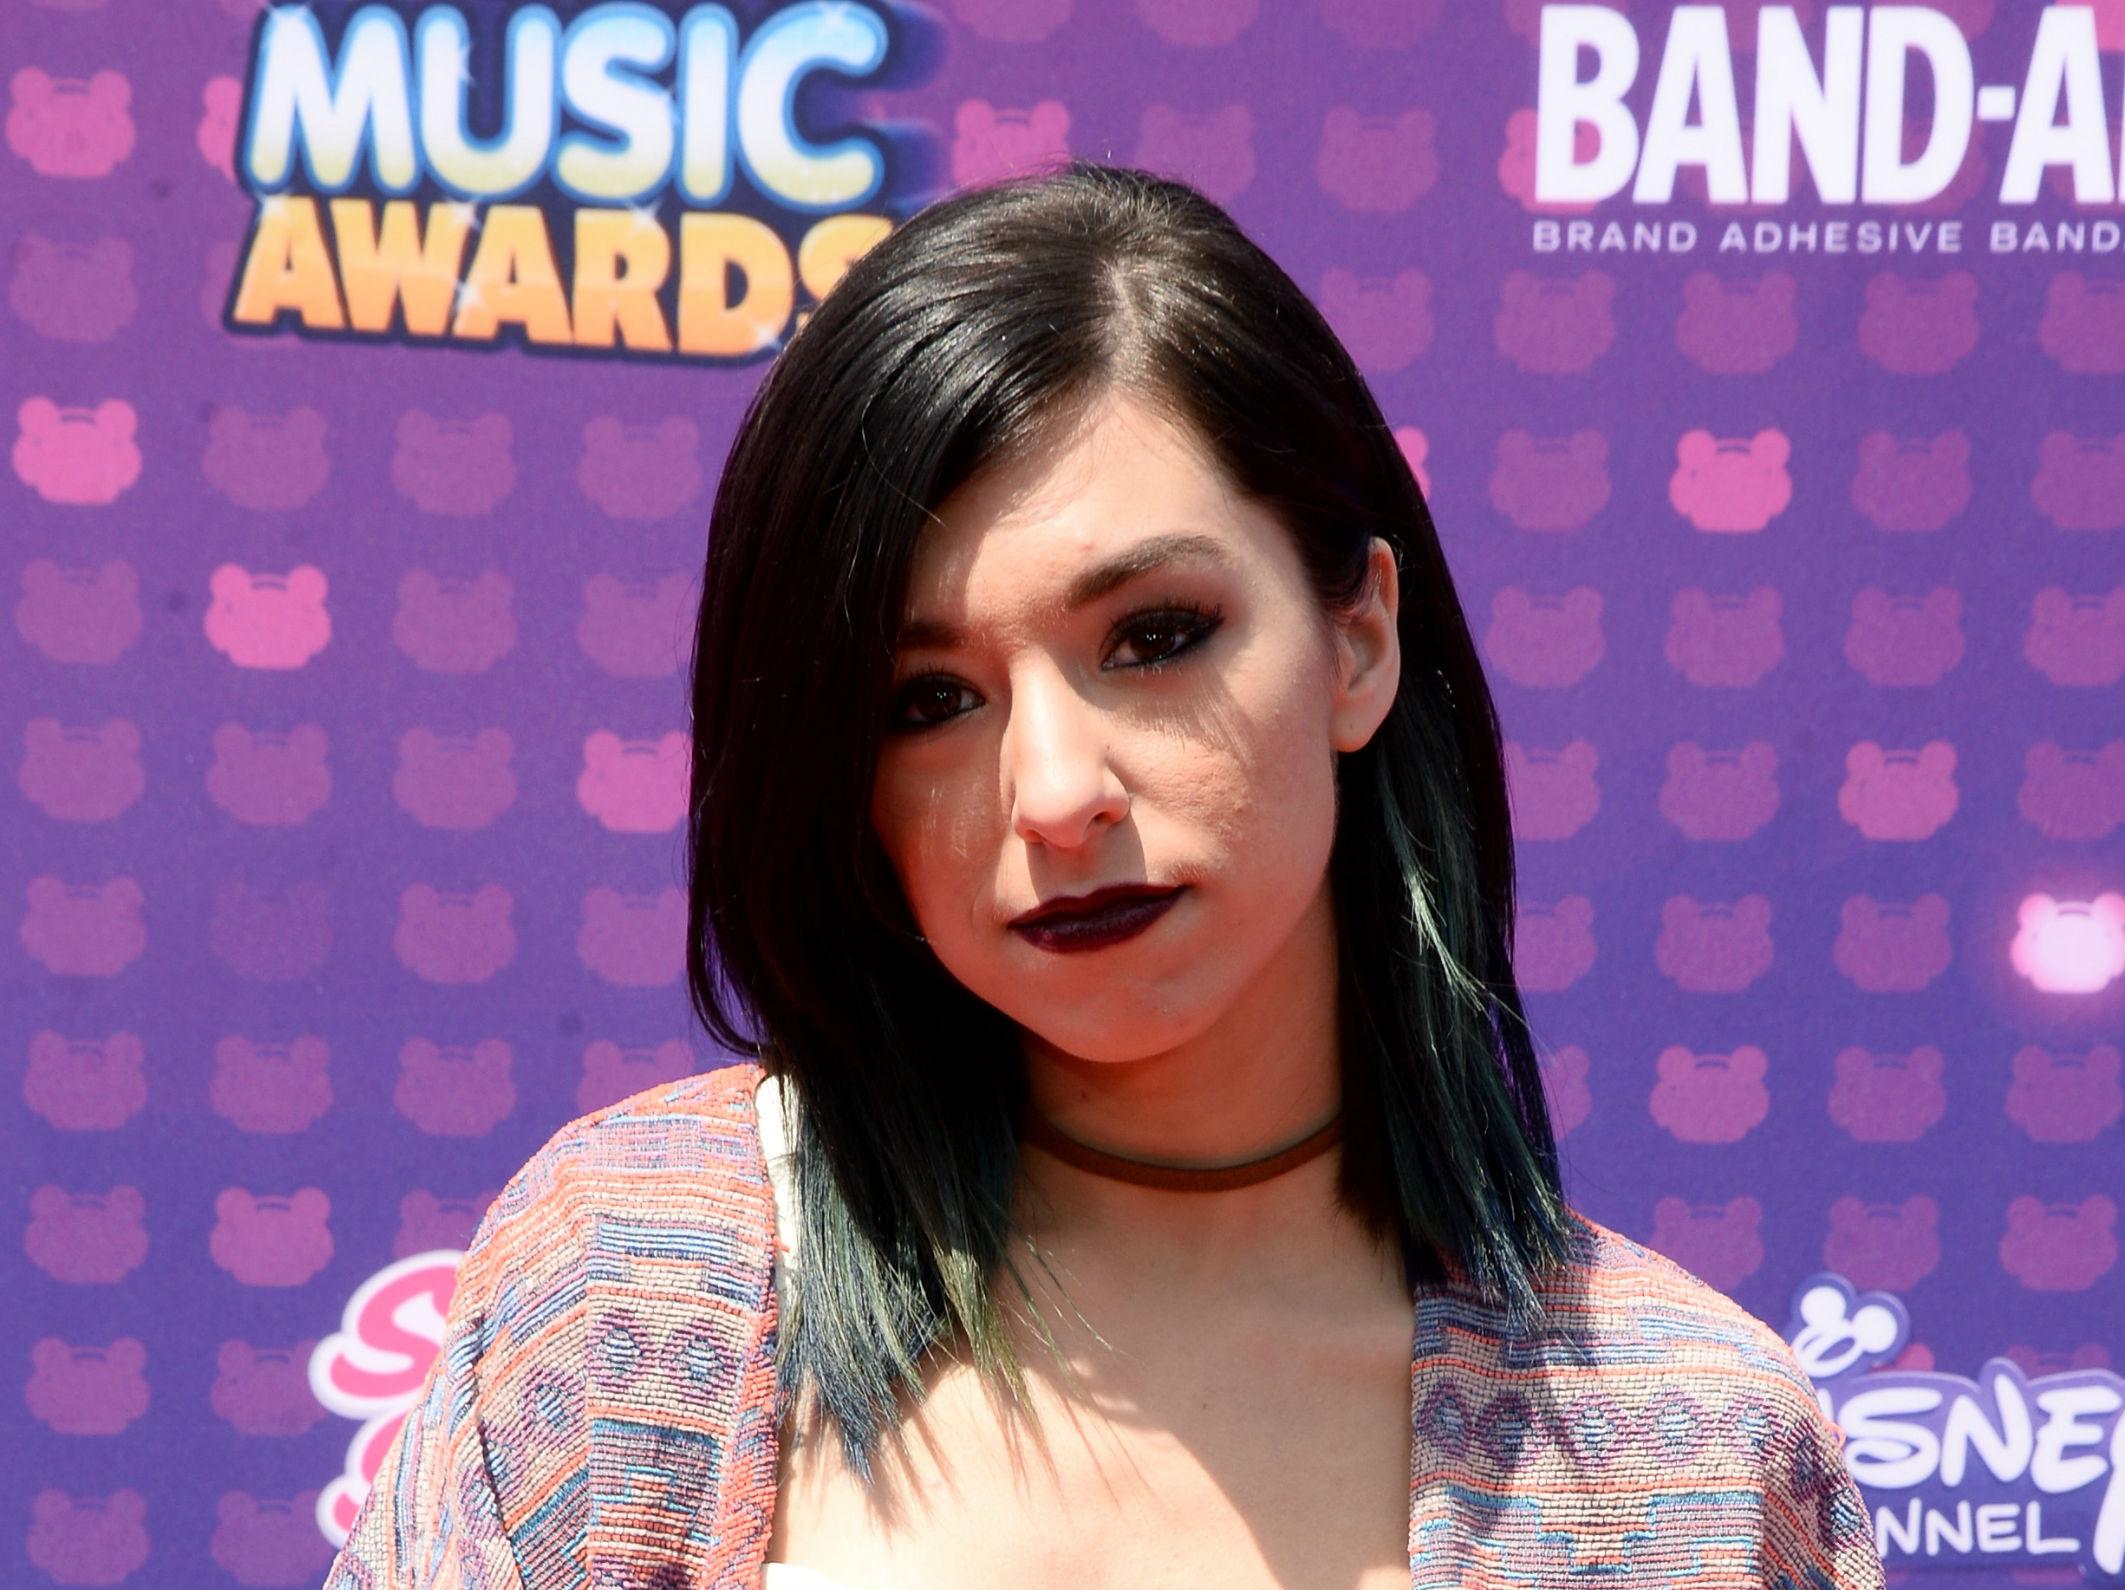 Grimmie garnered a fan base of millions after uploading her performances to her YouTube channel at the age of 15